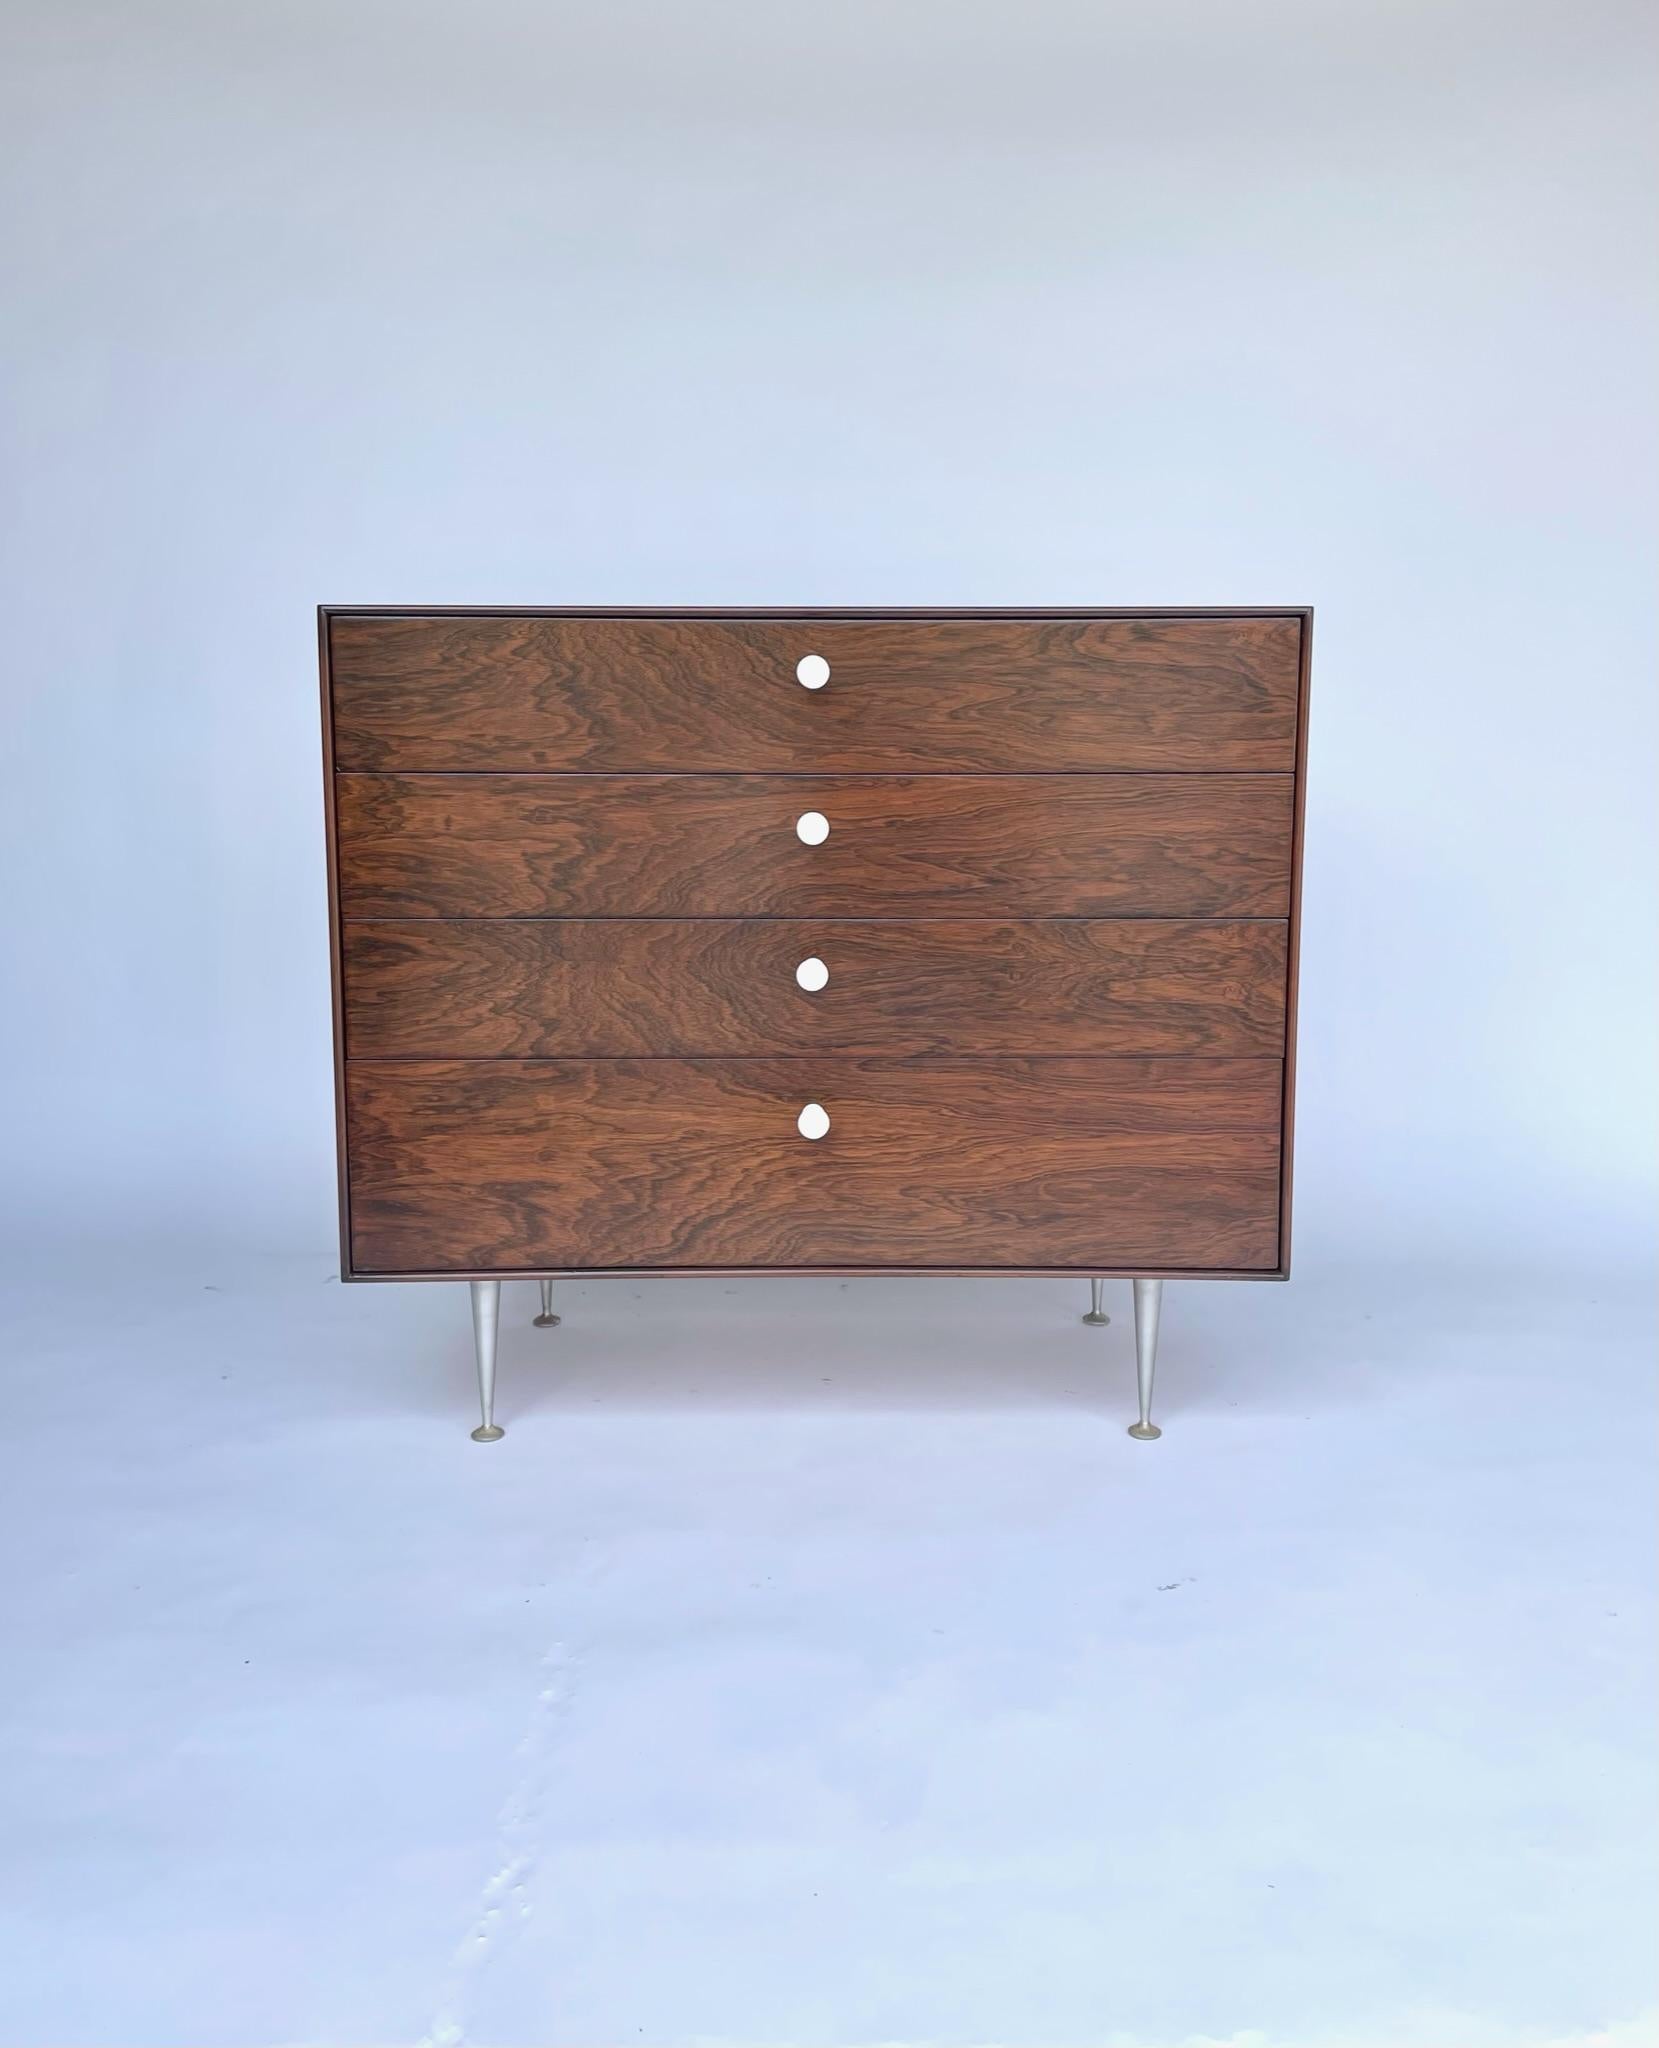 A rosewood thin edge chest designed by George Nelson for Herman Miller with exquisite rosewood grain and early original white porcelain handles. 

The George Nelson Rosewood Thin Edge 4-drawer Dresser, crafted by Herman Miller, epitomizes the